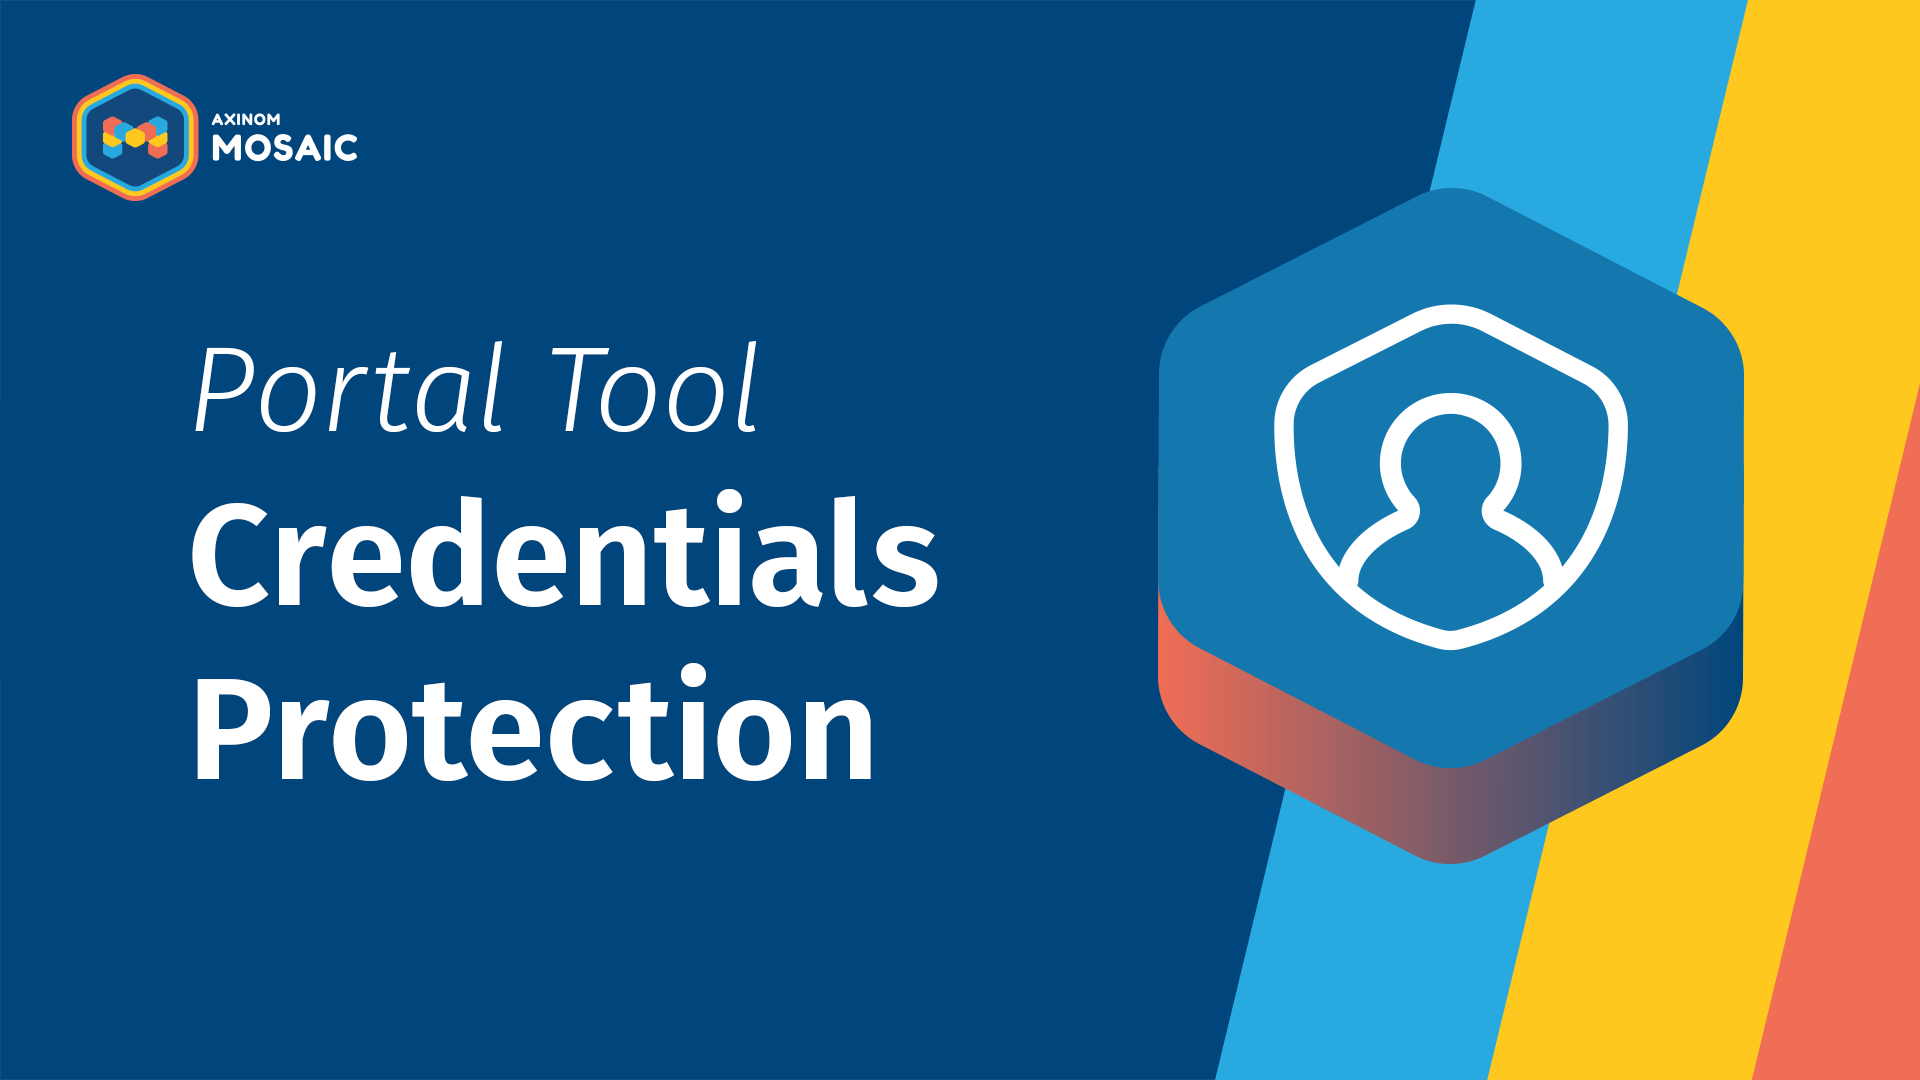 Portal tool: Credentials Protection